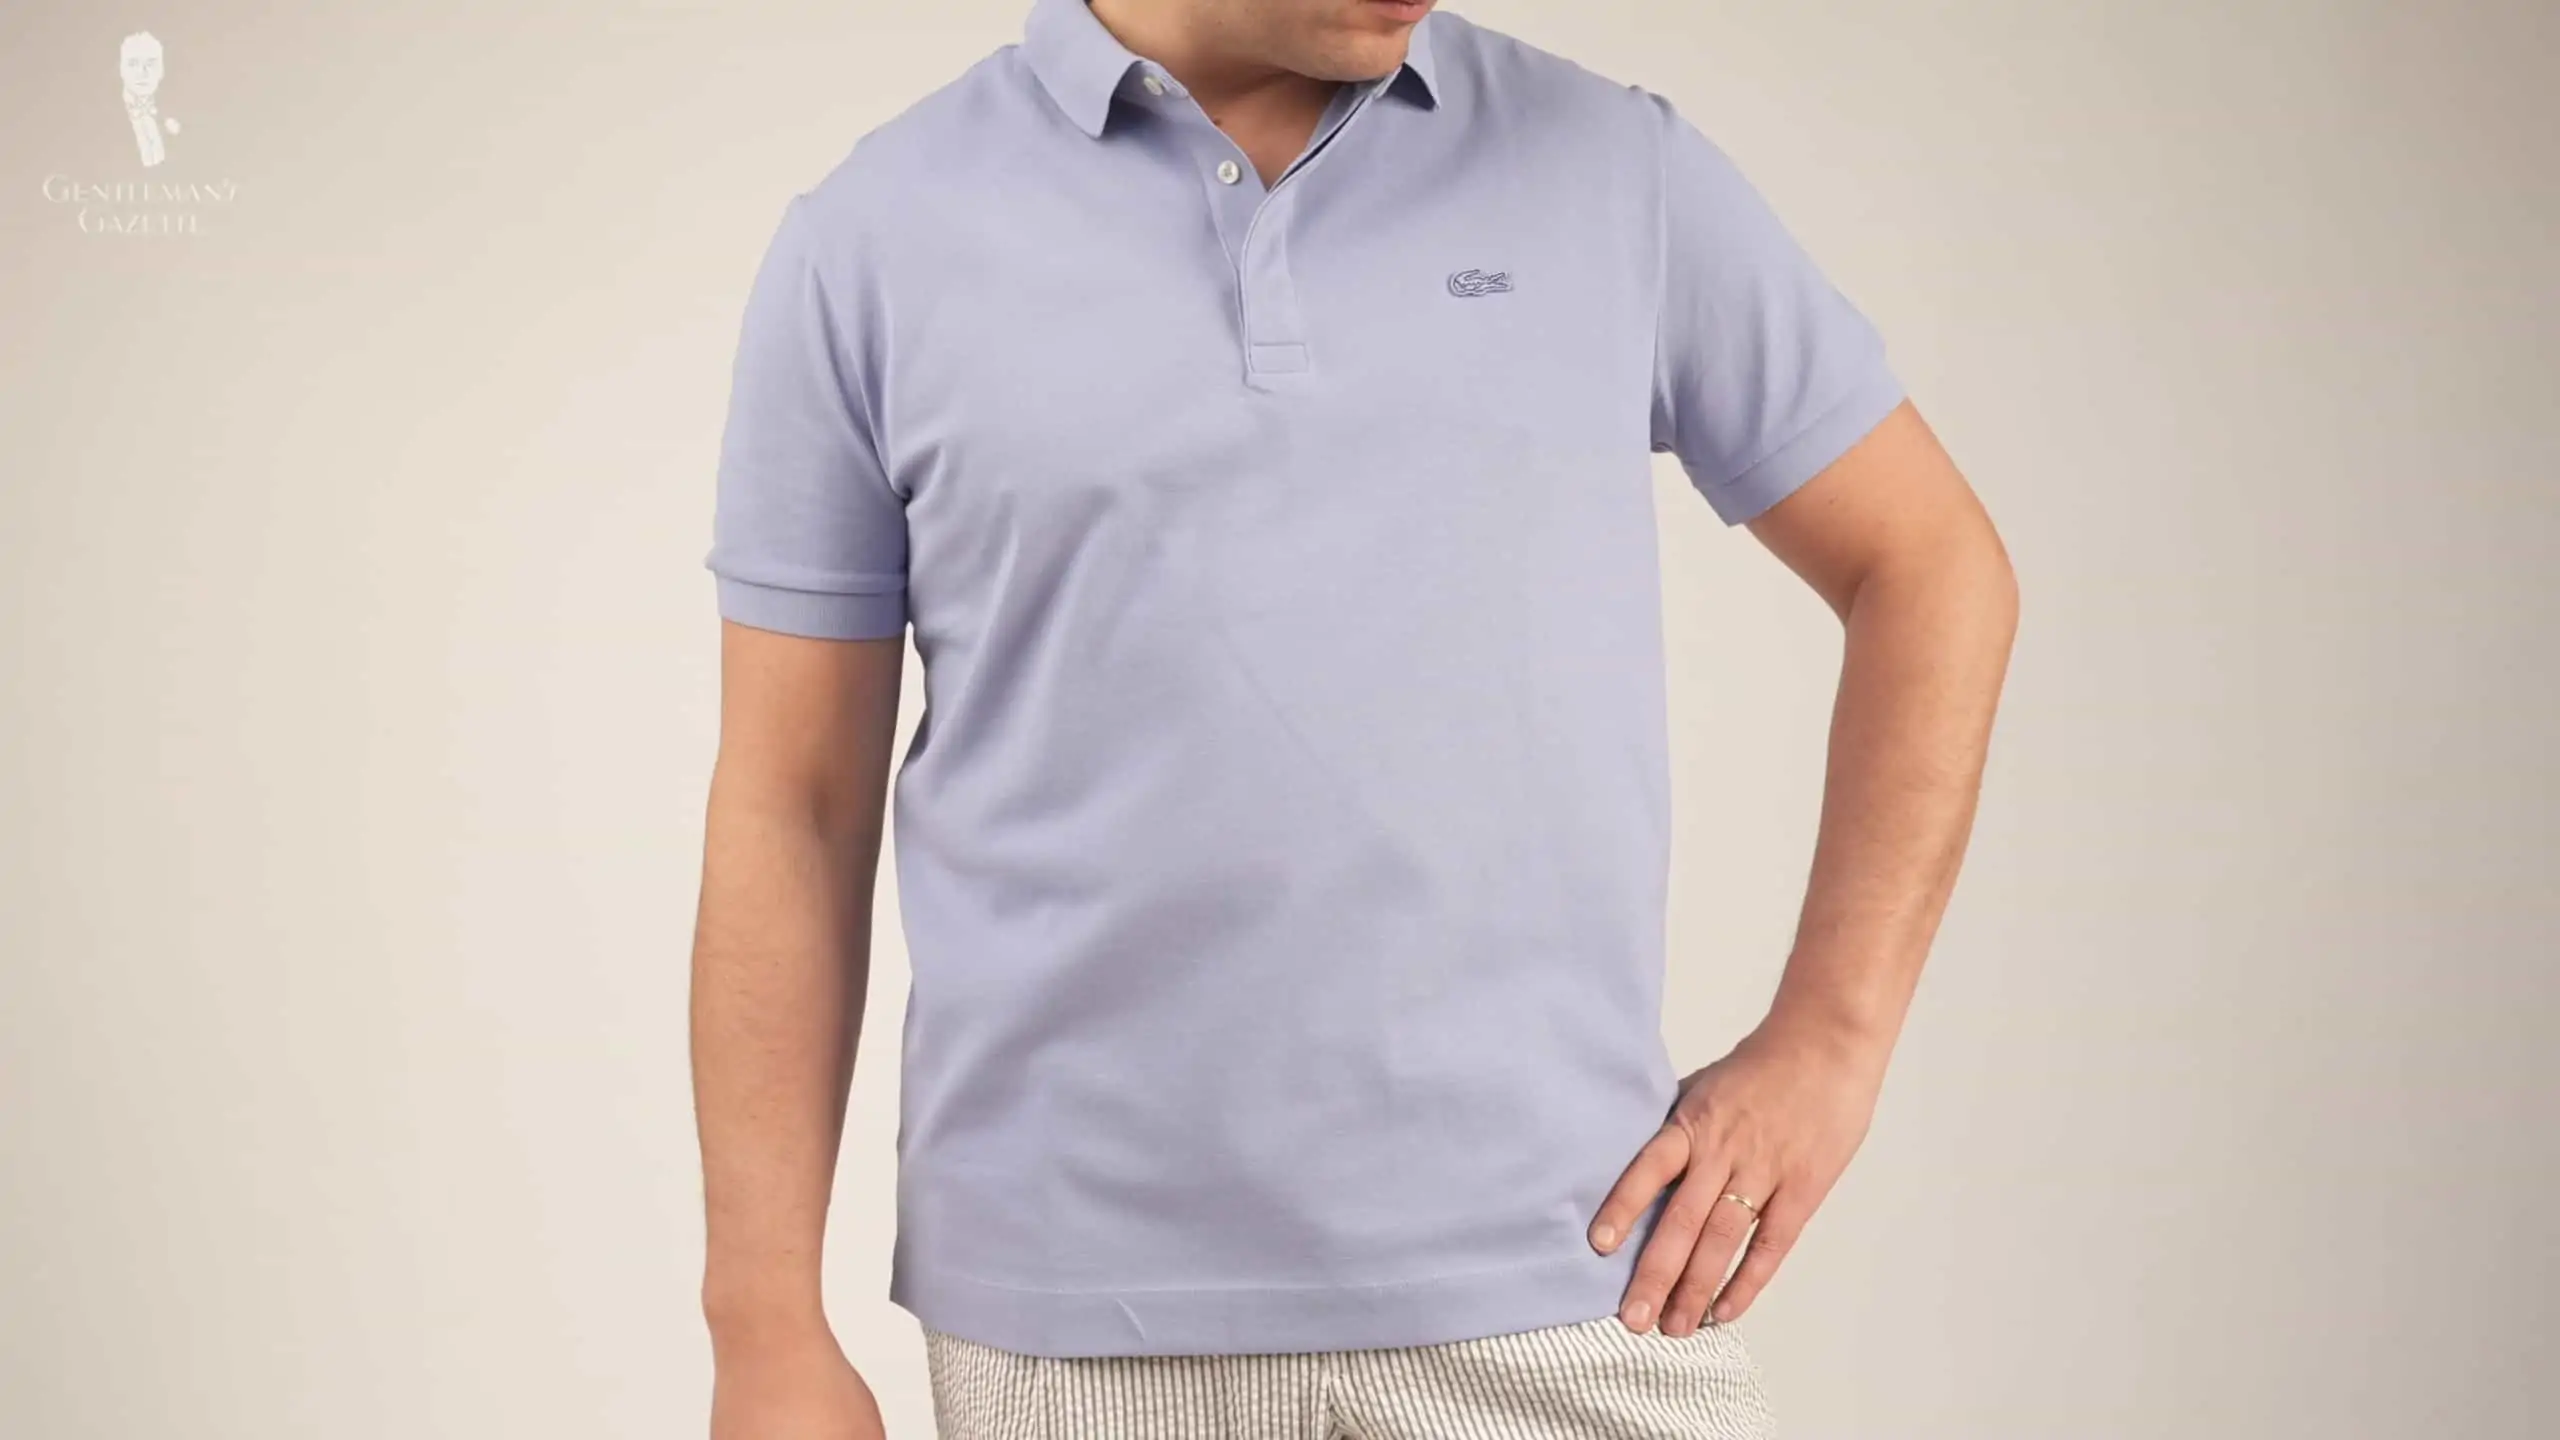 Lacoste Polo Is It Worth It? (In-Depth Review)